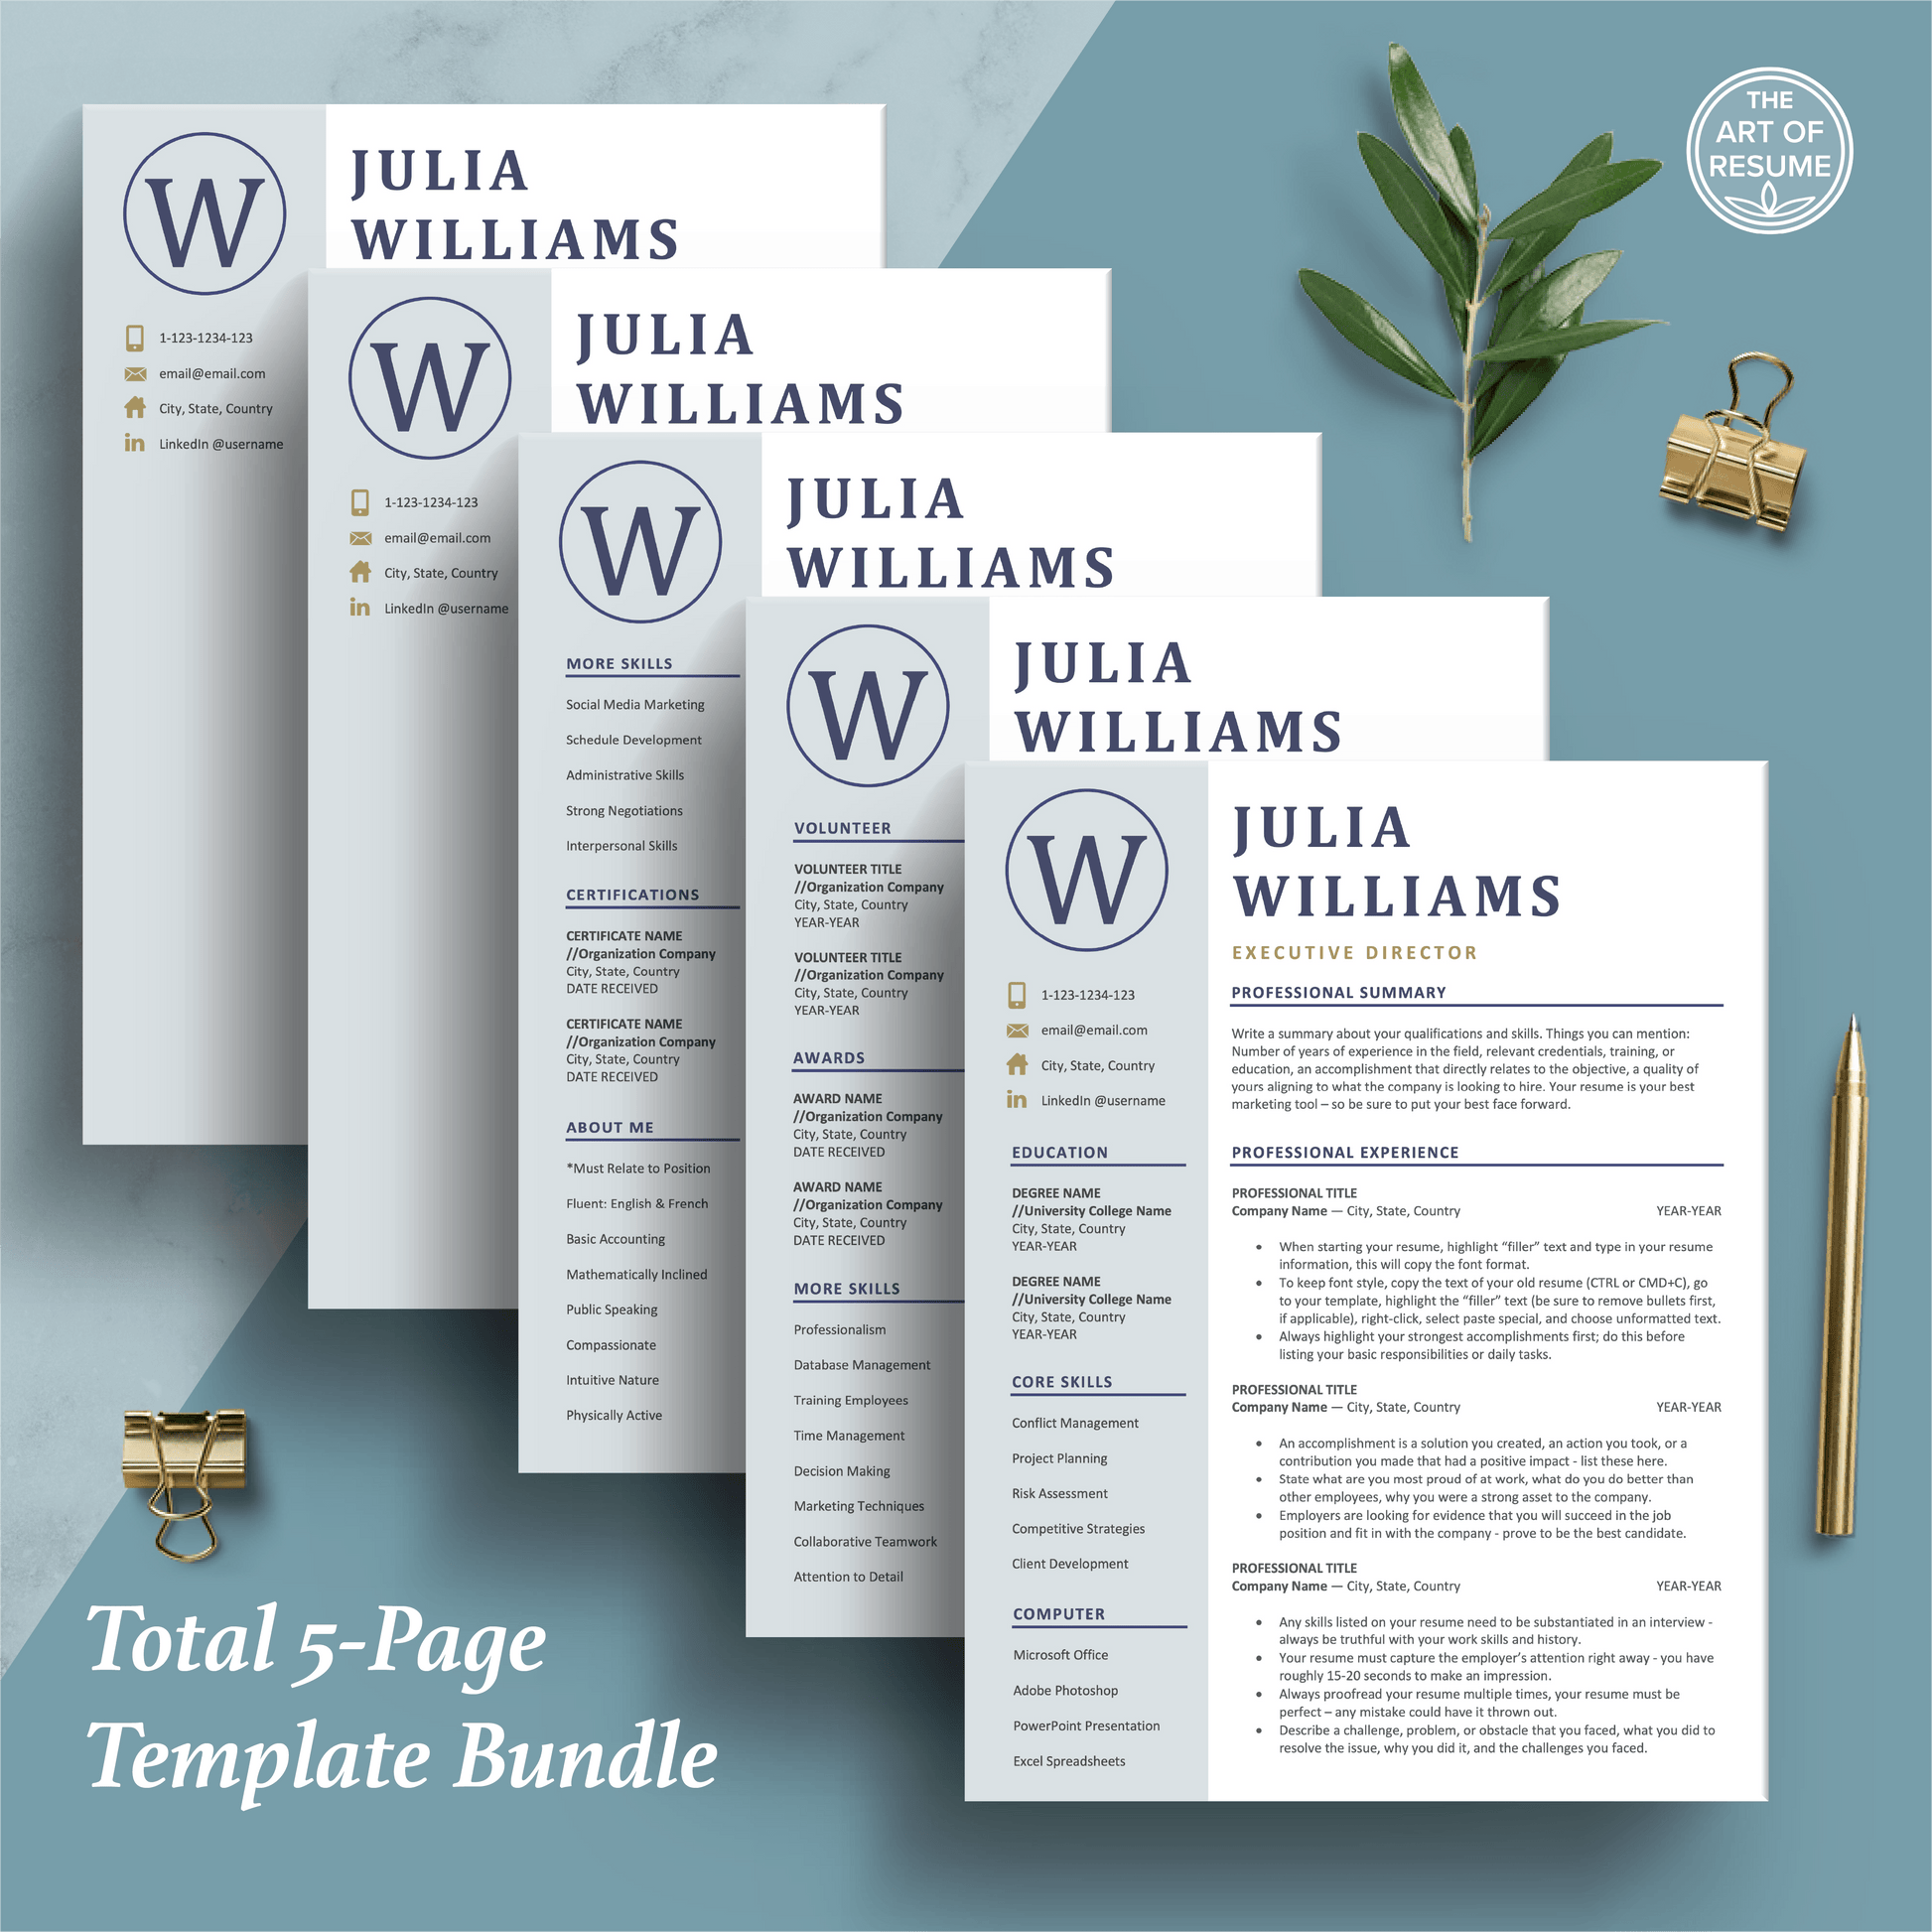 The Art of Resume Templates | Professional Blue Resume CV Design Bundle including matching cover letter and reference page